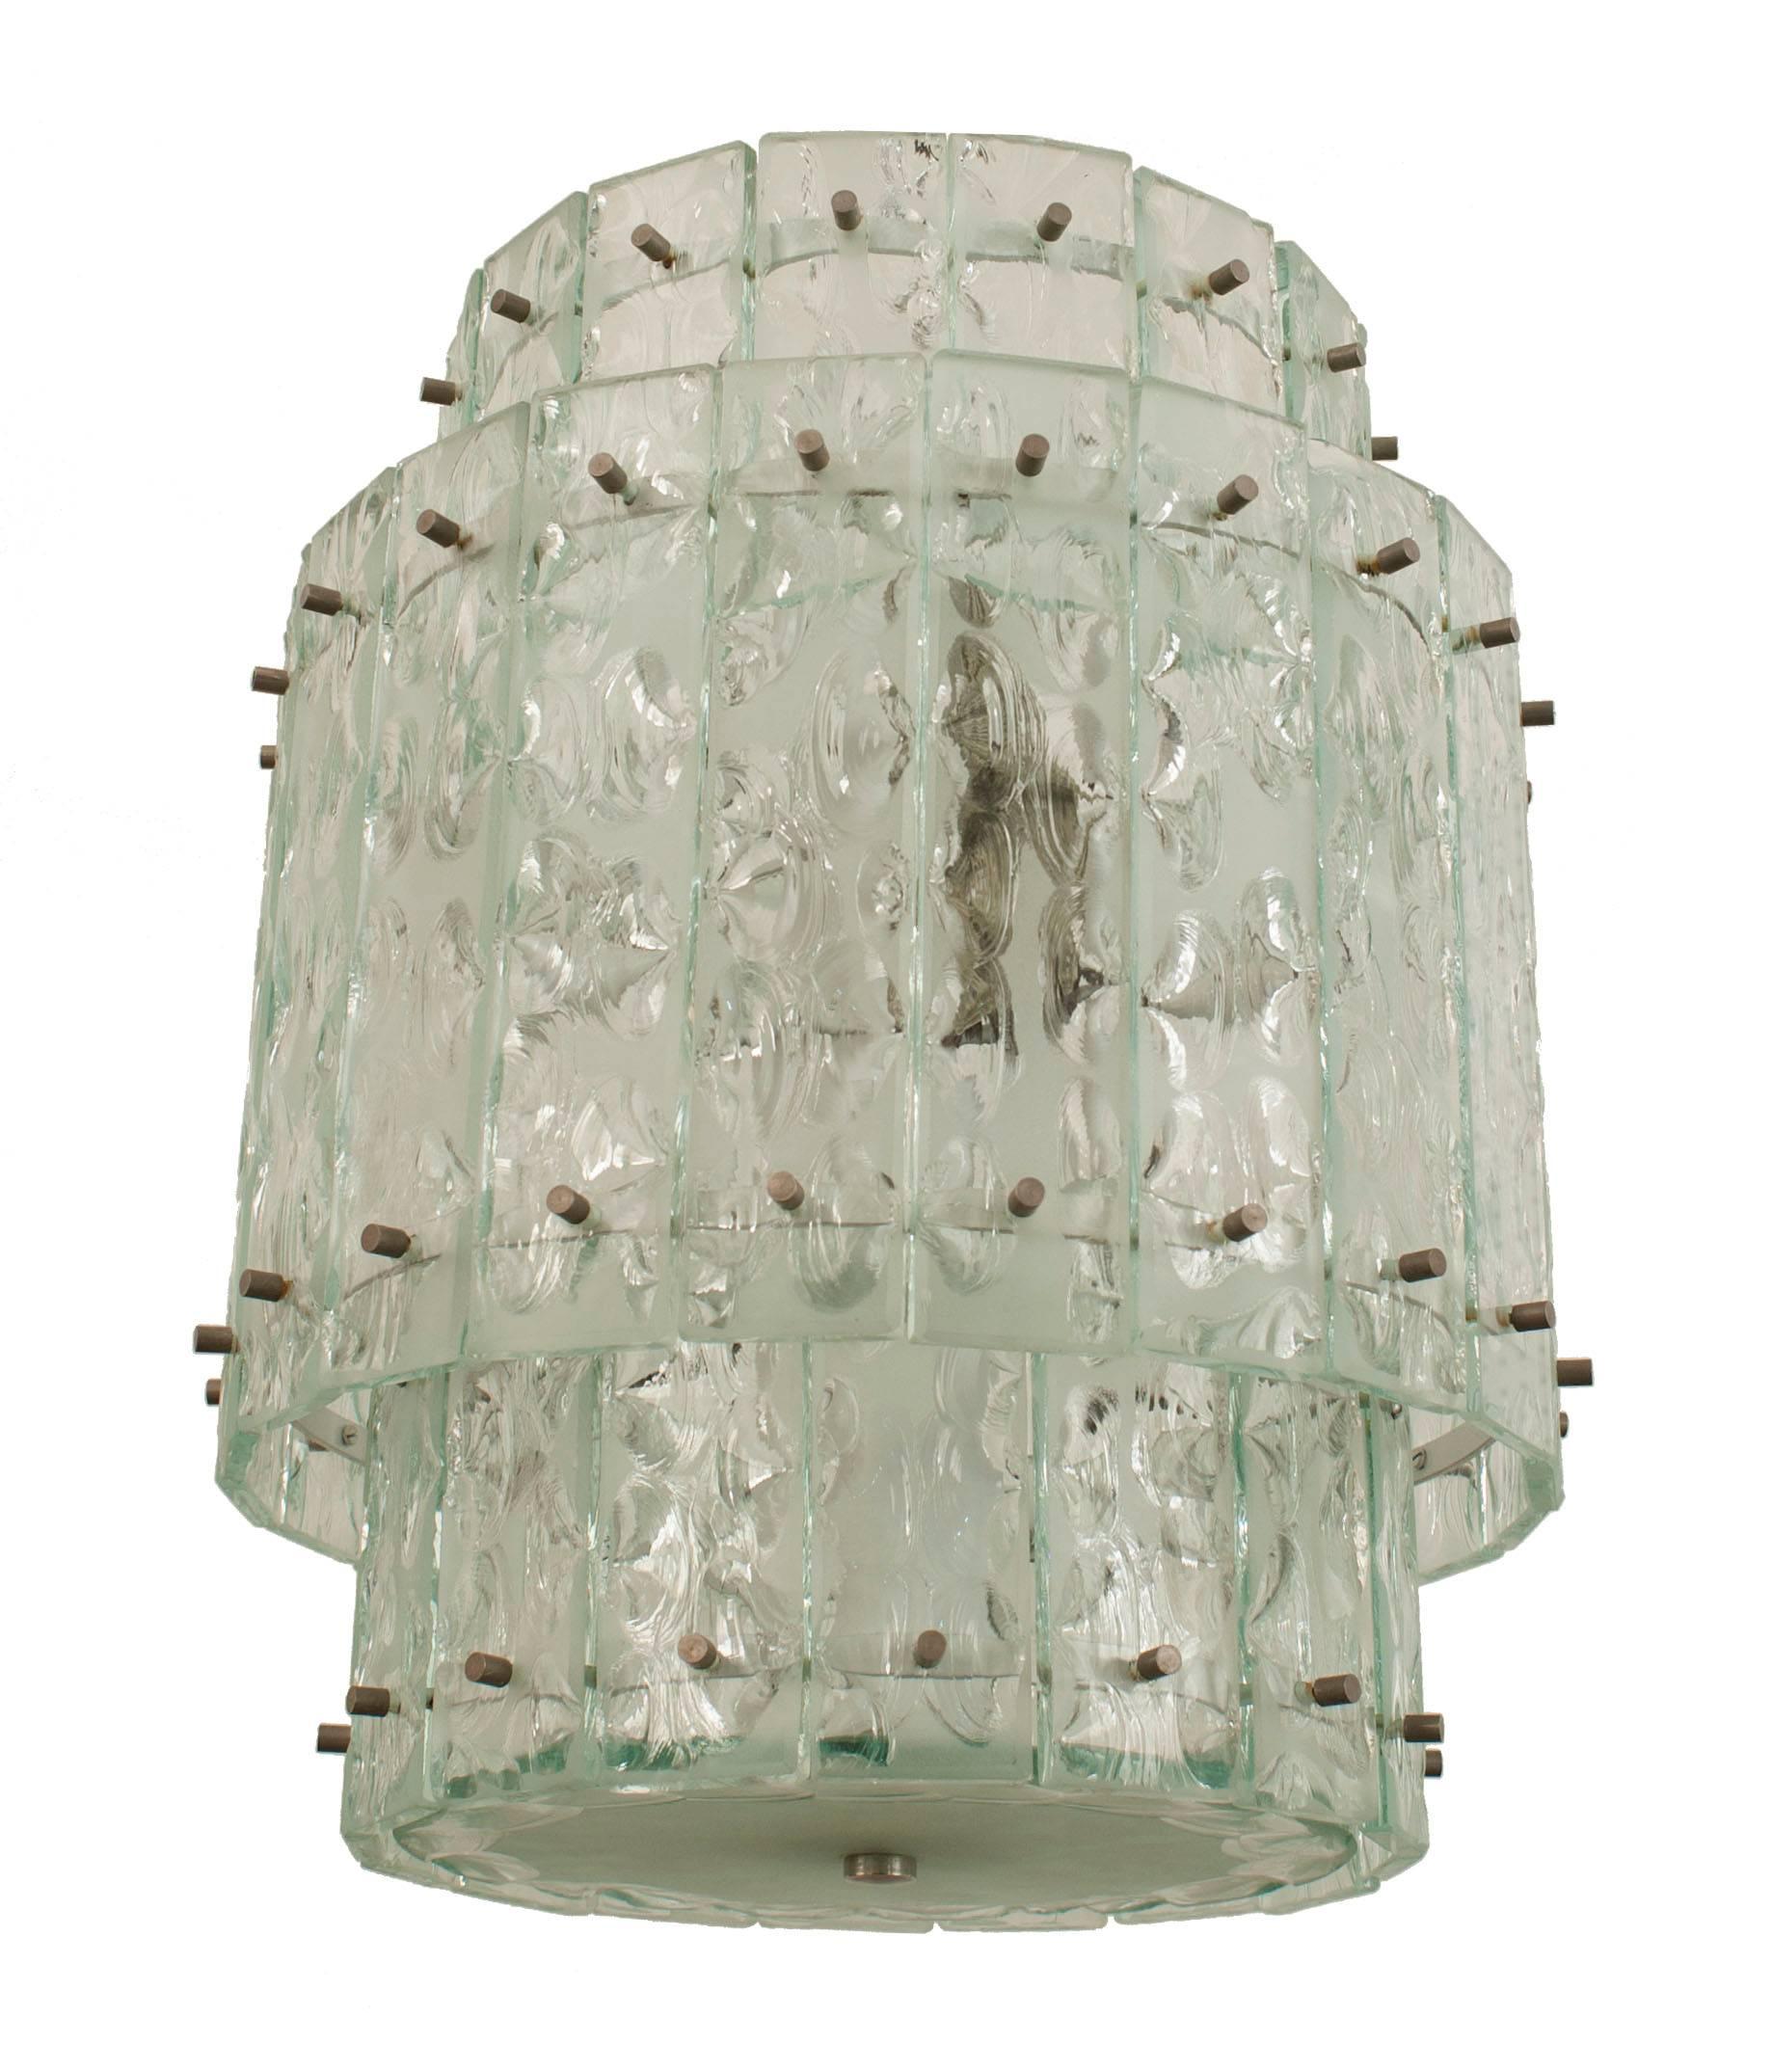 Italian 1940s acid etched and textured glass panel round tiered lantern with a frosted glass round bottom panel.
